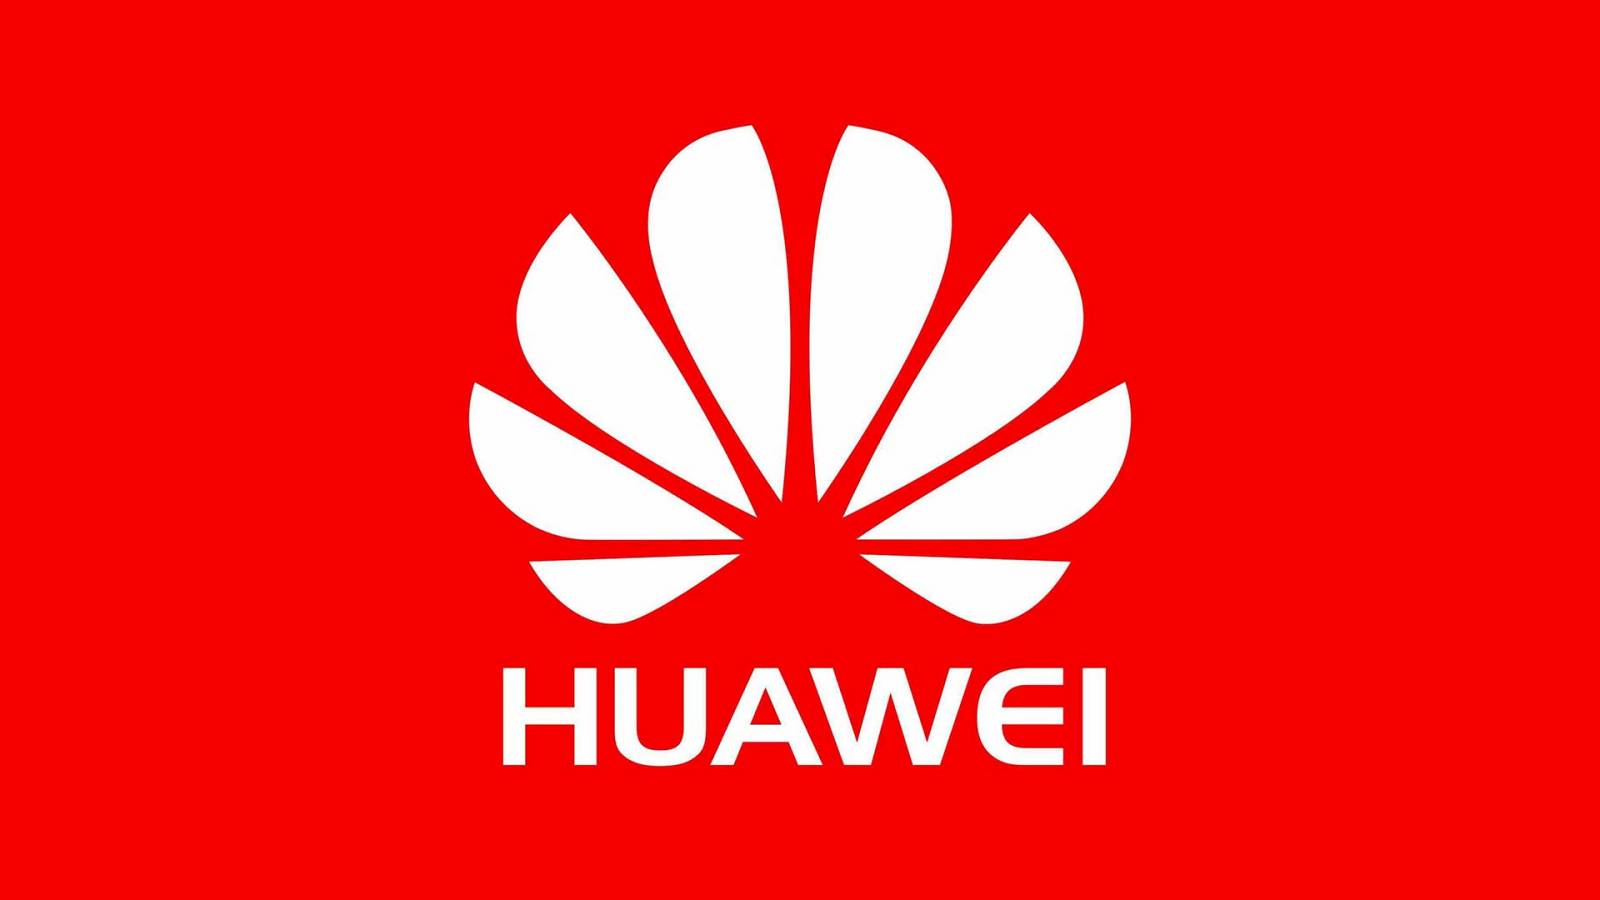 Huawei is EMBARRASSING itself in a STUPID and Completely Useless way